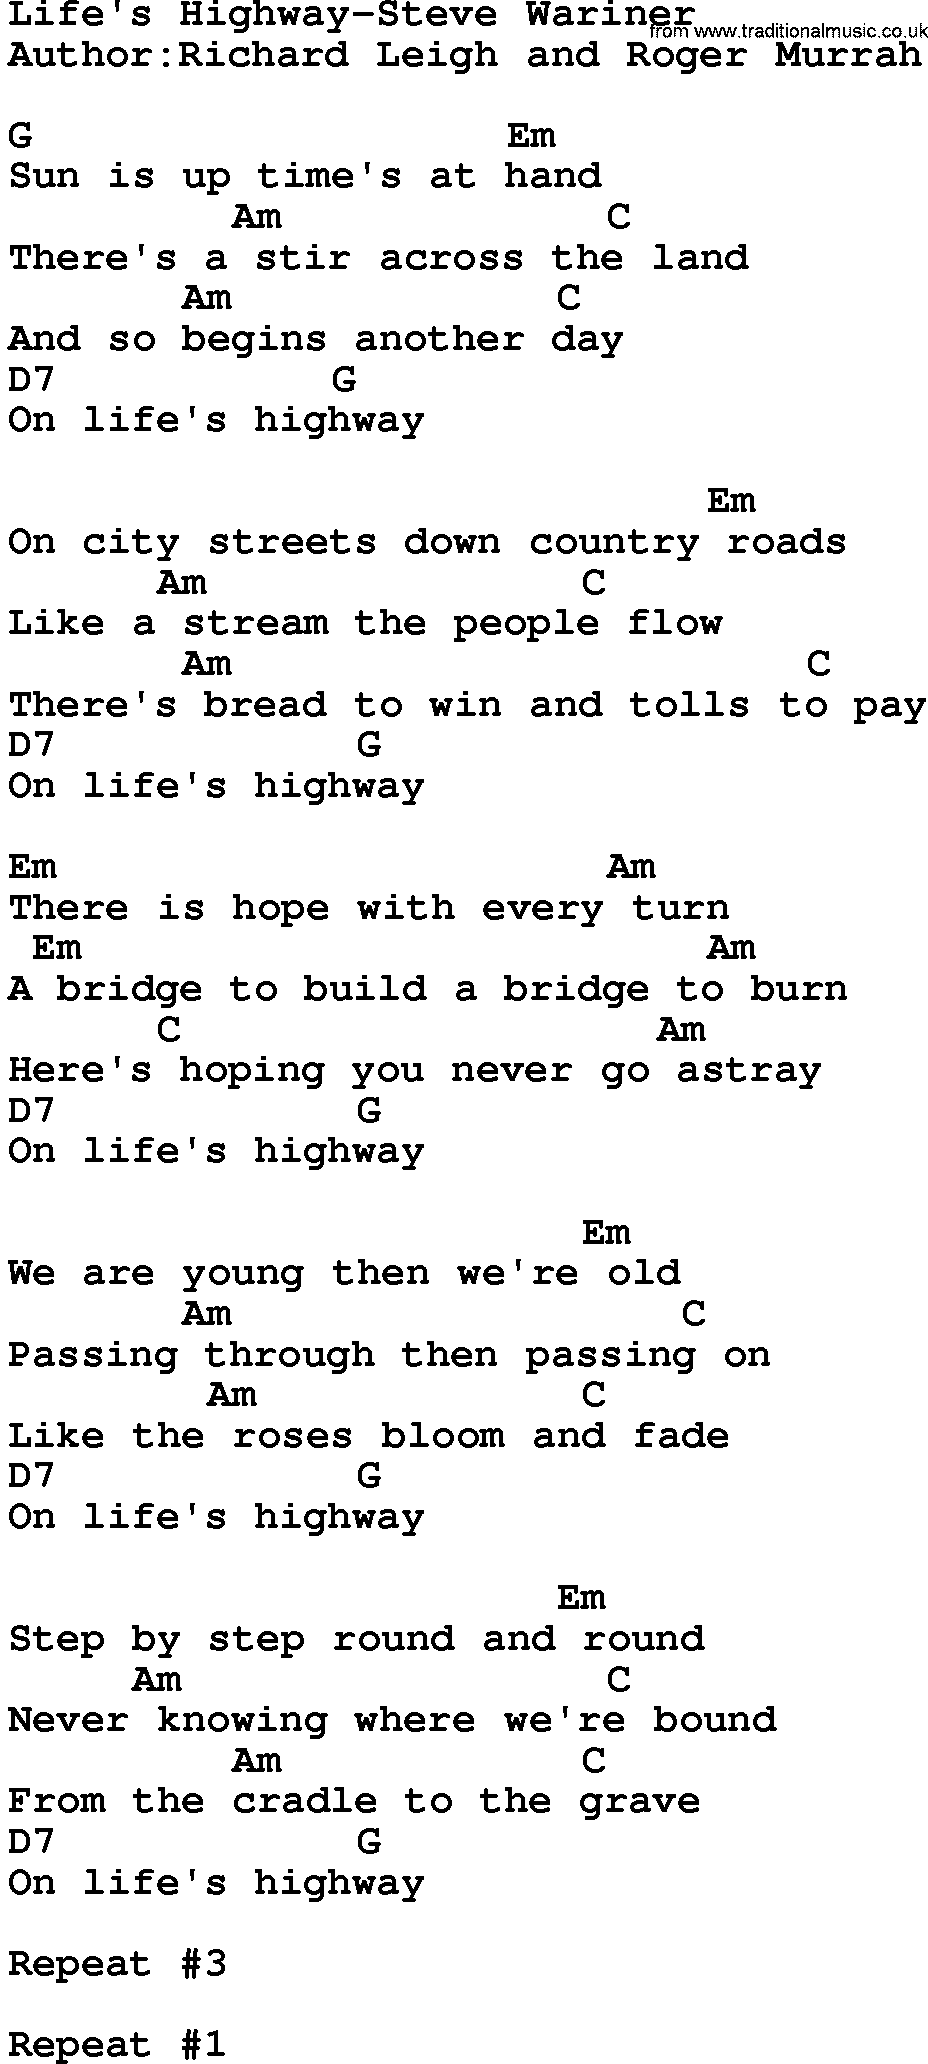 Country music song: Life's Highway-Steve Wariner lyrics and chords